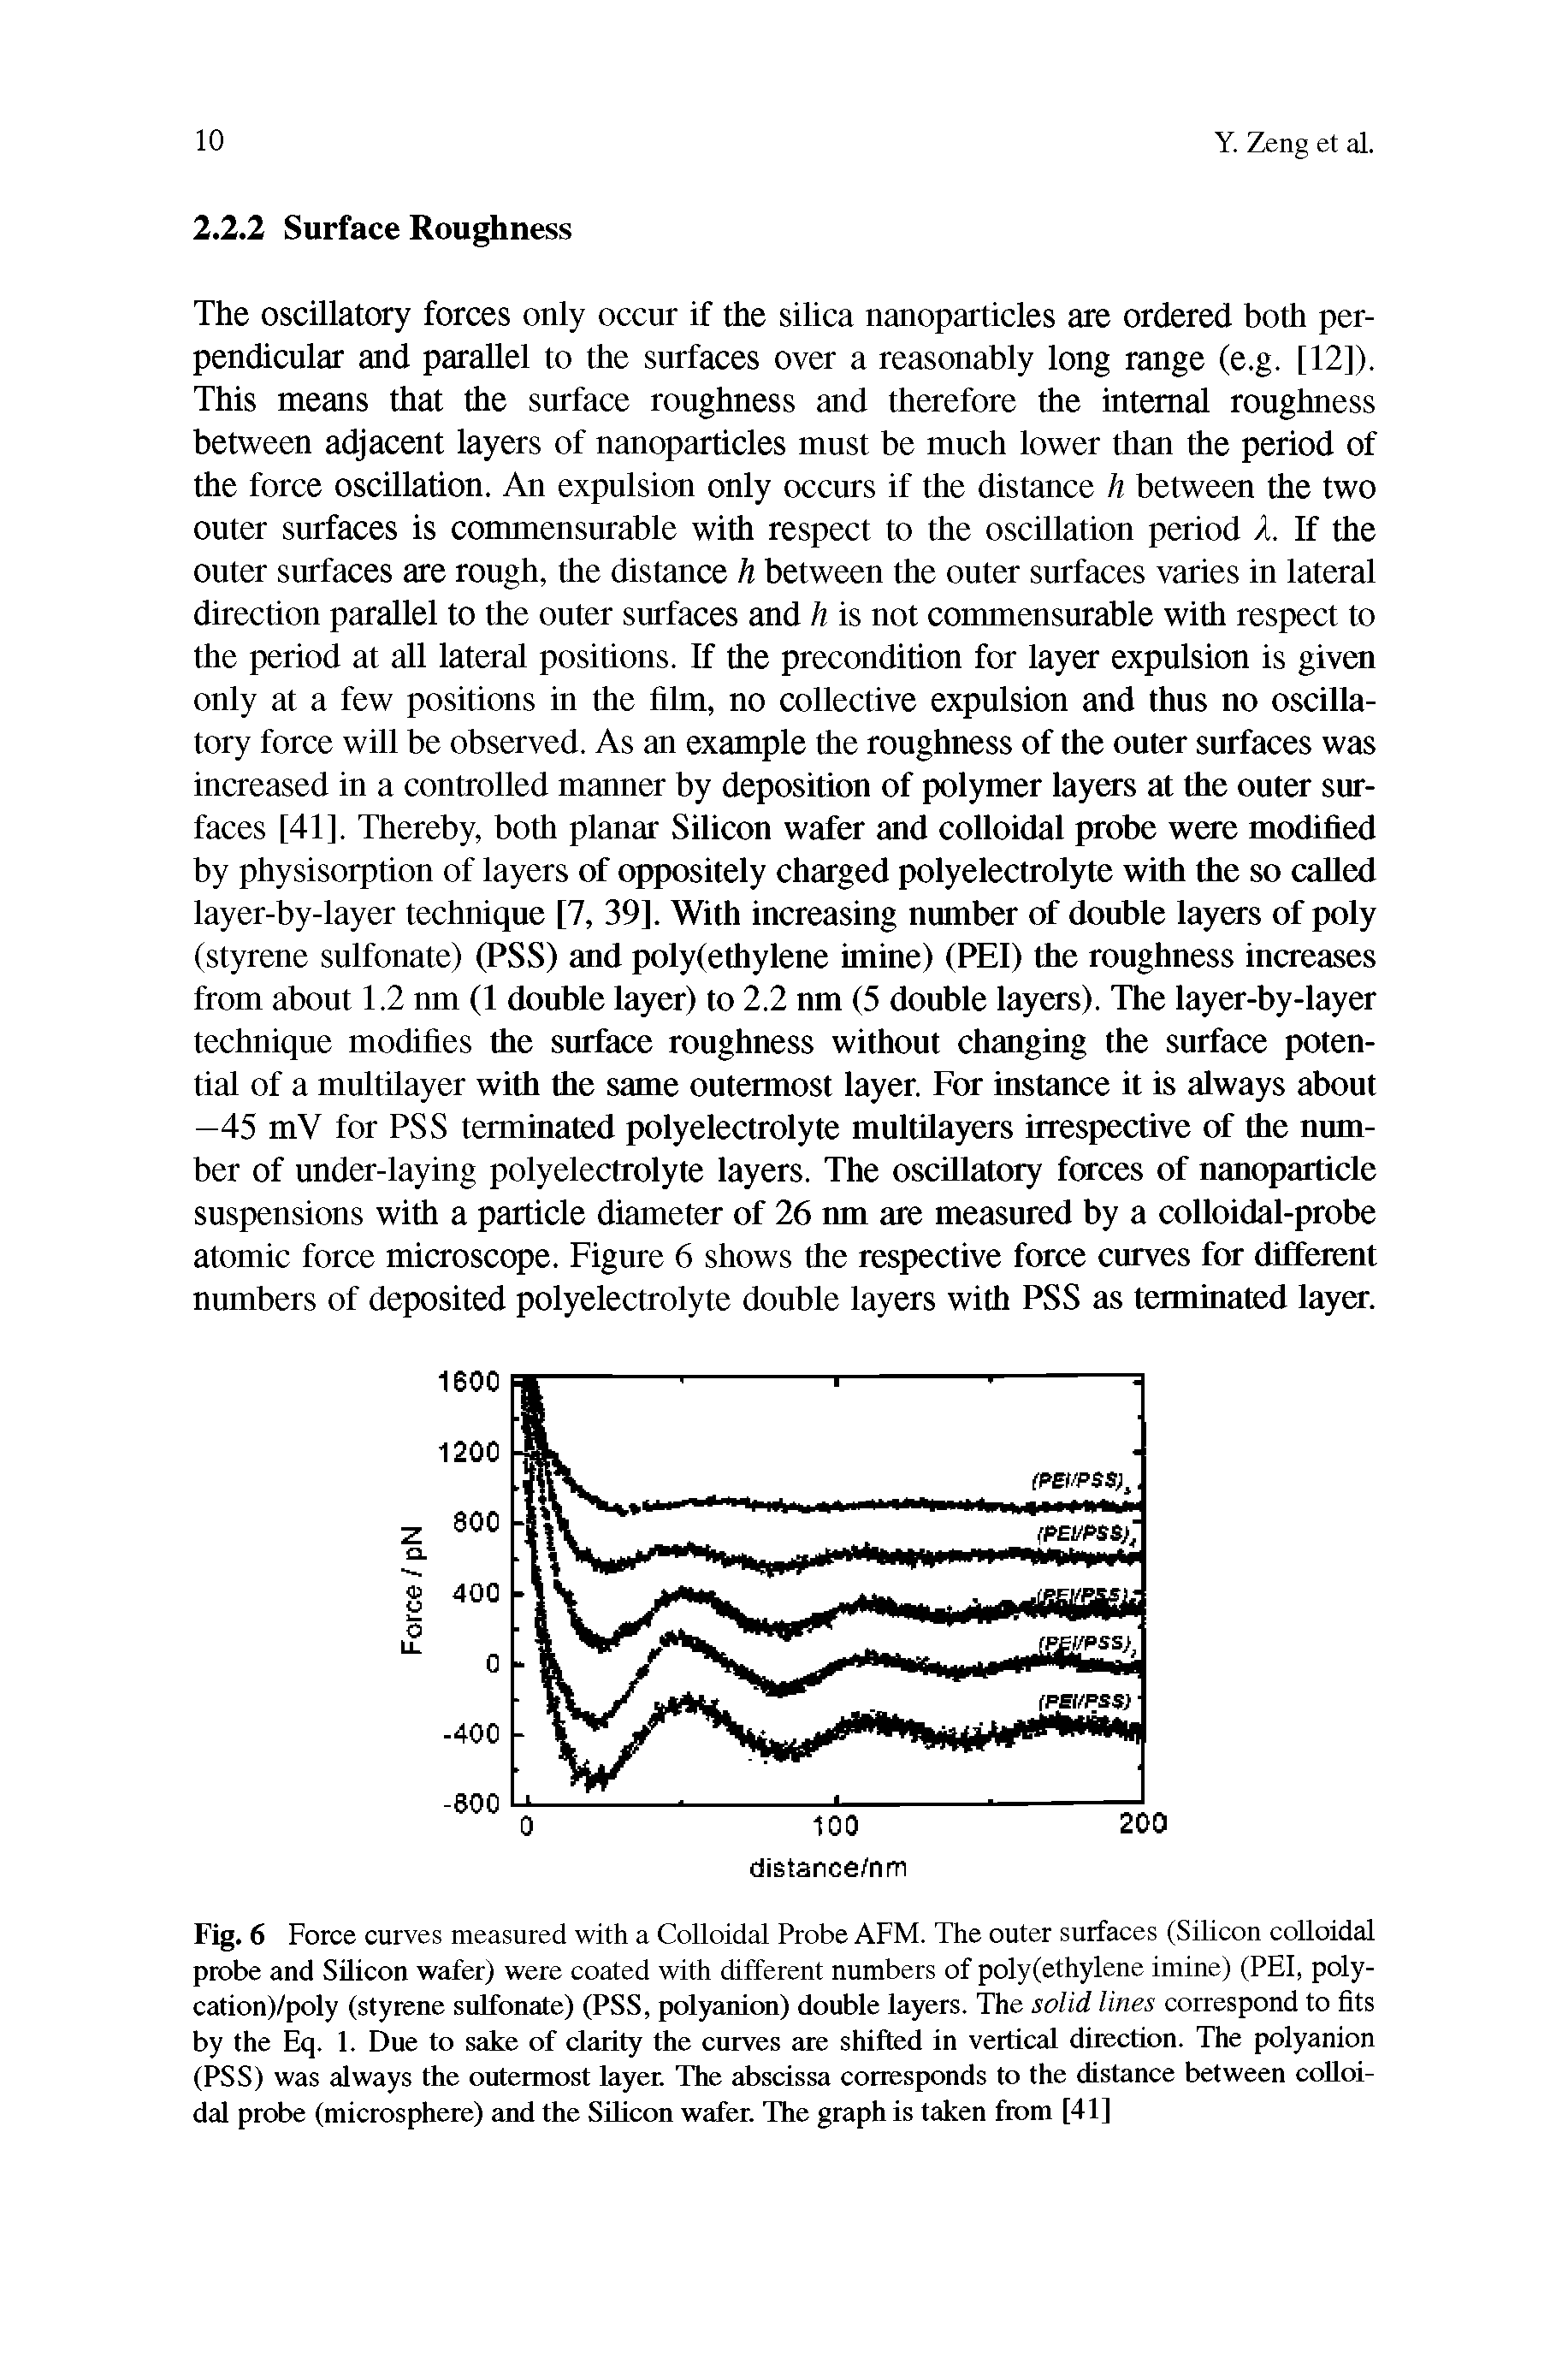 Fig. 6 Force curves measured with a Colloidal Probe AFM. The outer surfaces (Sdicon colloidal probe and Silicon wafer) were coated with different numbers of polyfethylene imine) (PEI, poly-cation)/poly (styrene sulfonate) (PSS, polyanion) double layers. The solid lines correspond to fits by the Eq. 1. Due to sake of clarity the curves are shifted in vertical direction. The polyanion (PSS) was always the outermost layer The abscissa corresponds to the distance between colloidal probe (microsphere) and the Silicon wafer. The graph is taken from [41]...